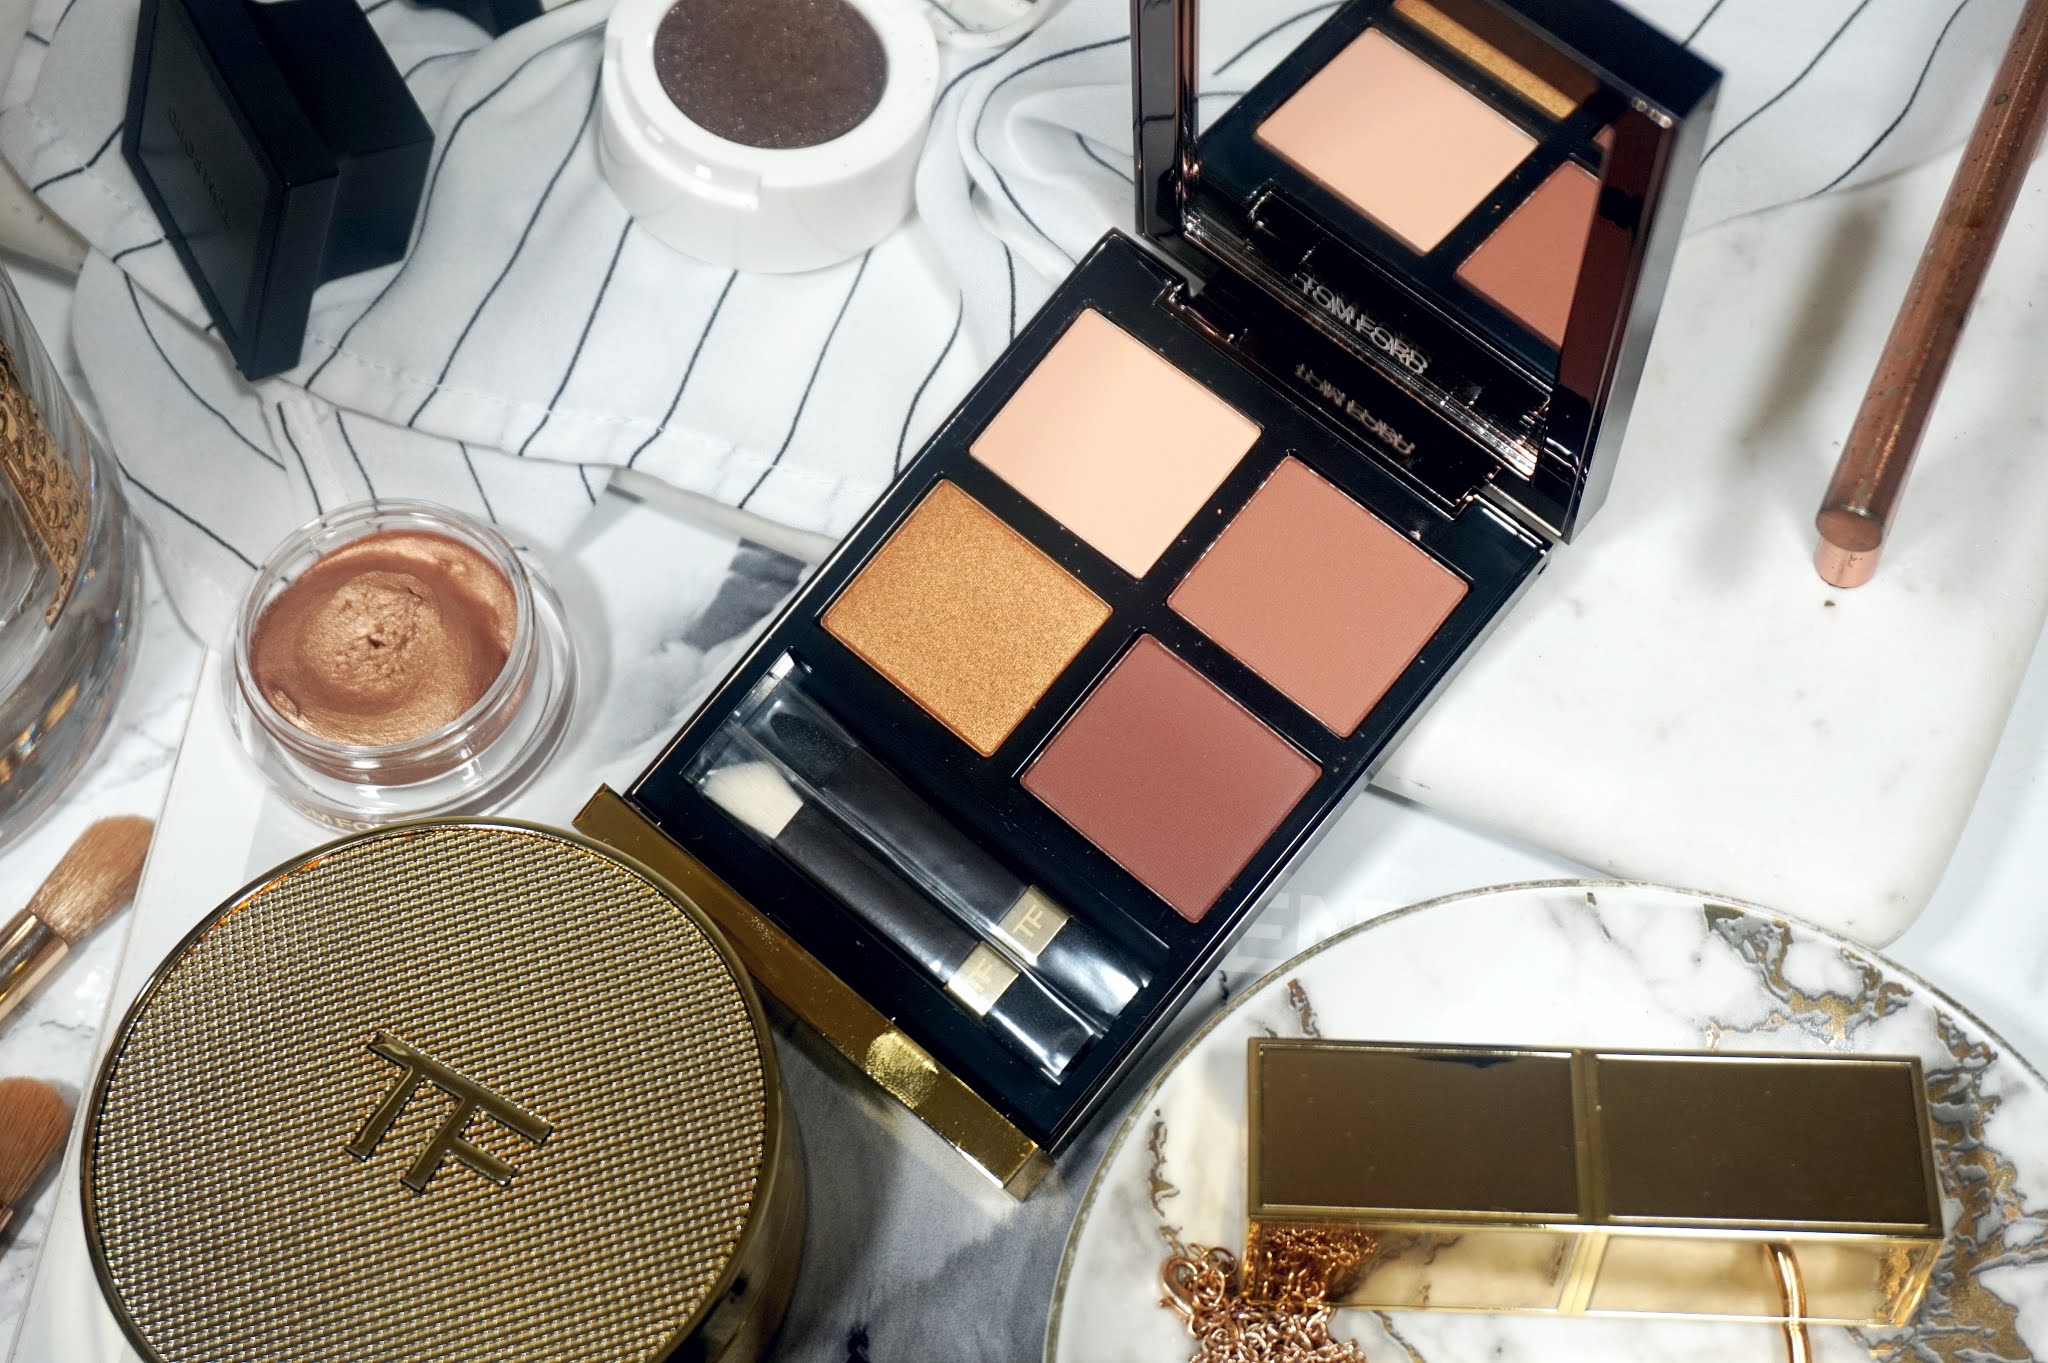 Tom Ford Desert Fox Eye Color Quad Review and Swatches